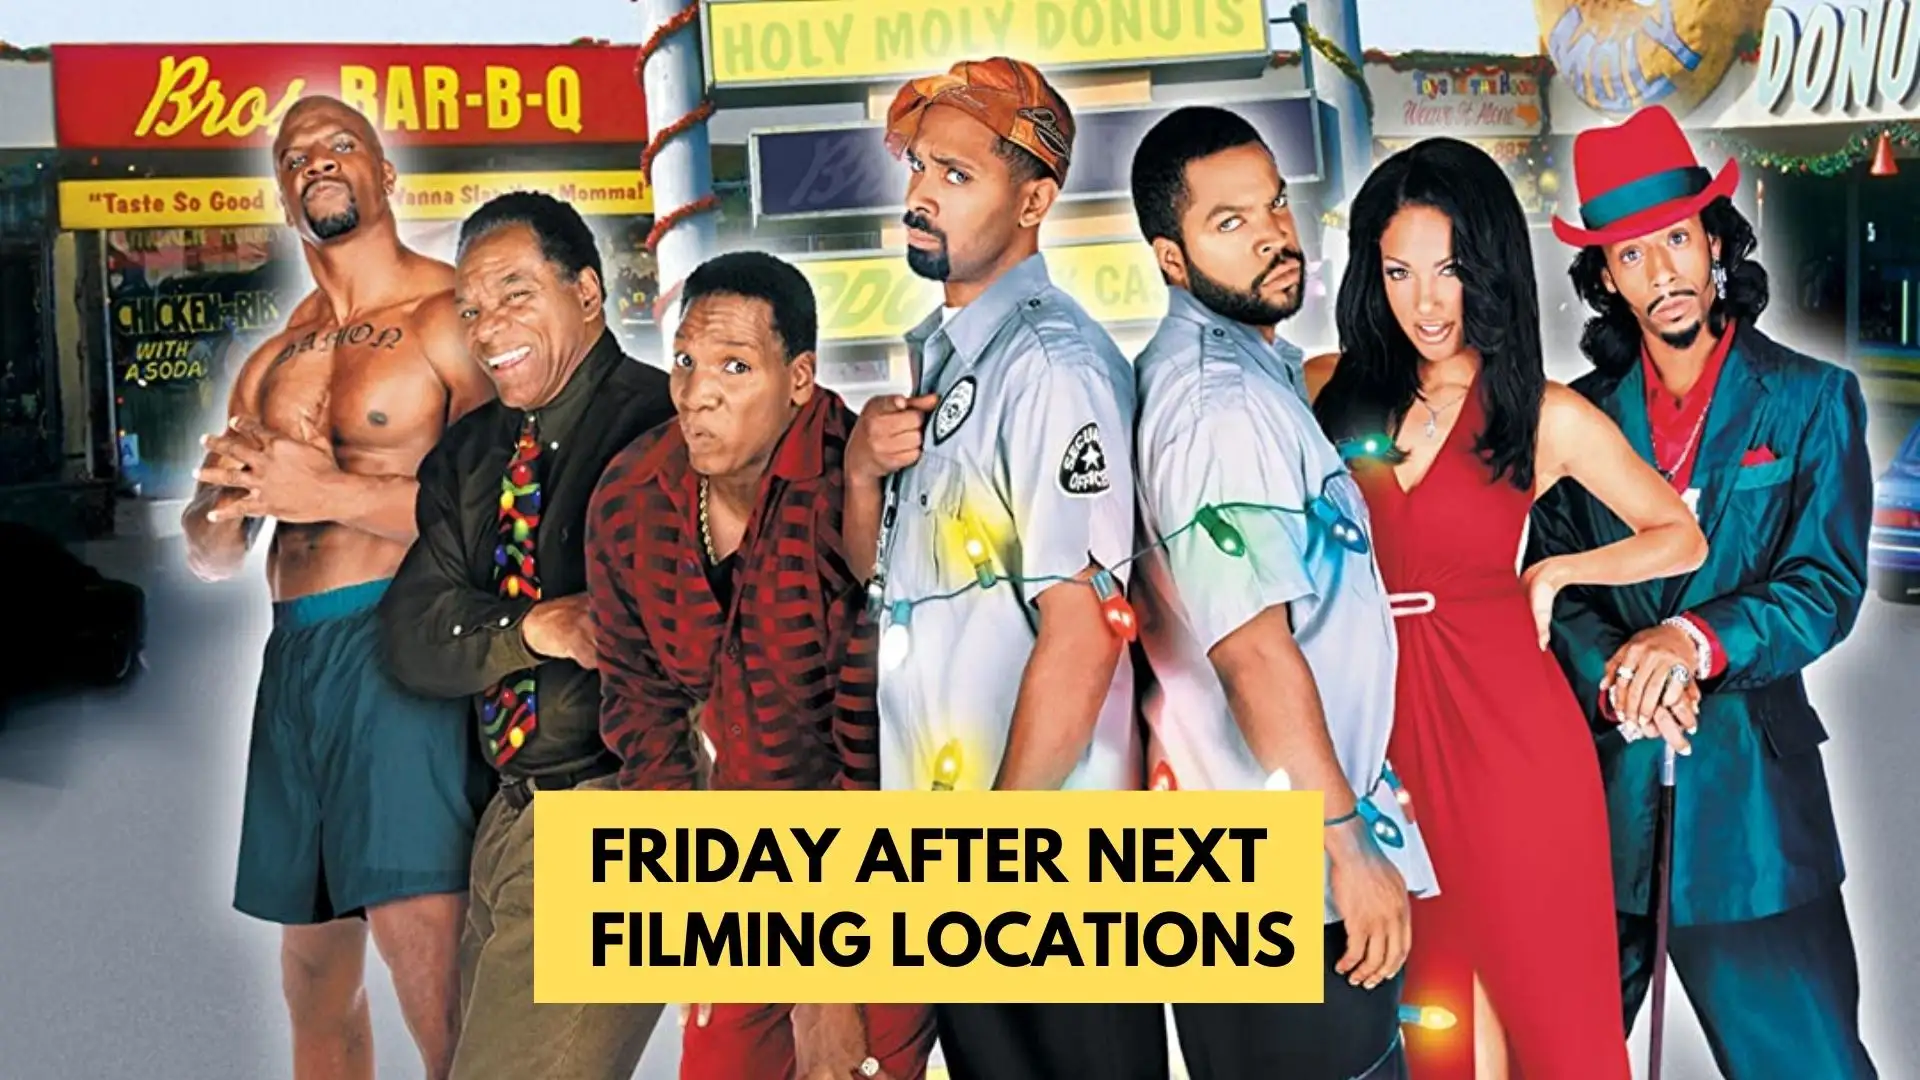 Friday After Next Filming Locations (Image credit: amazon.com)